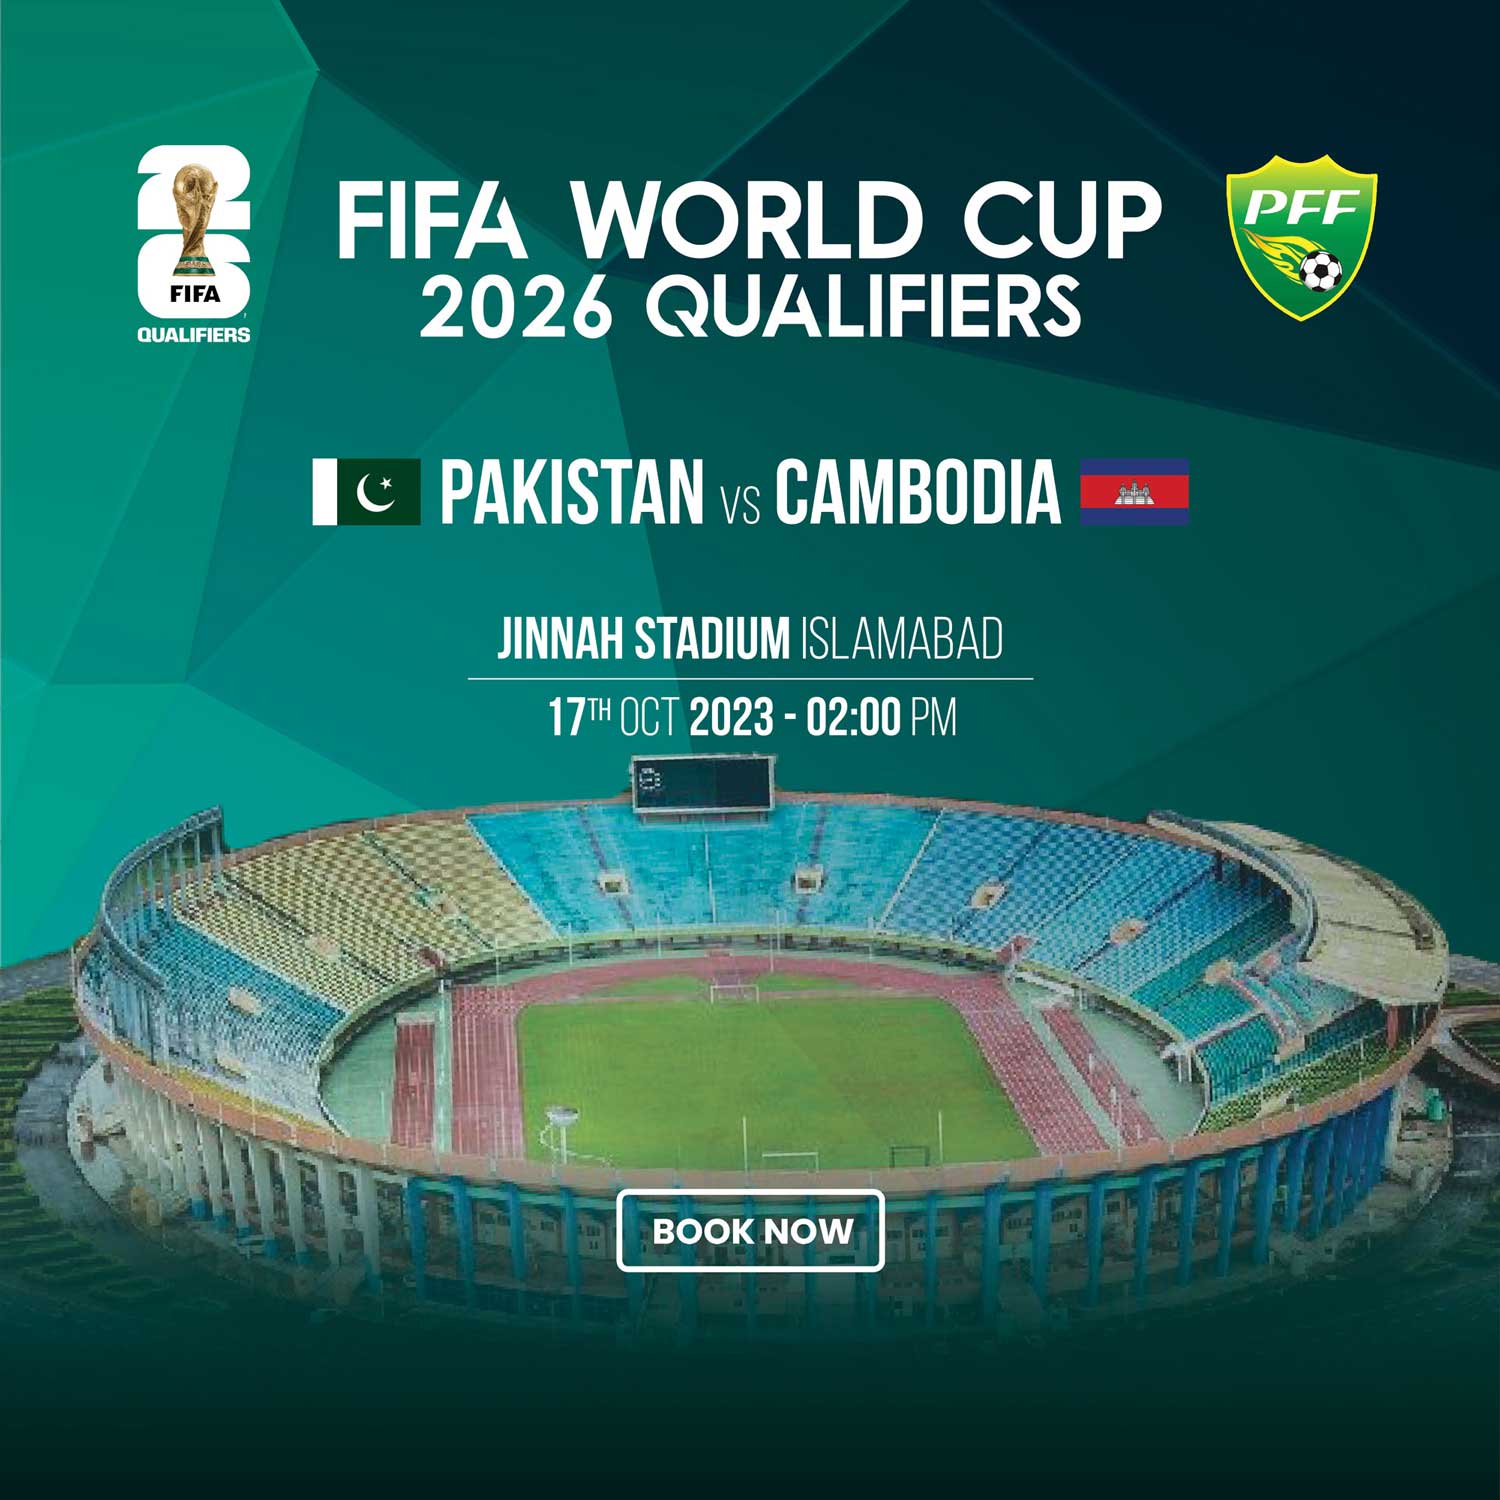 FIFA World Cup 2026 Qualifiers - Round 1